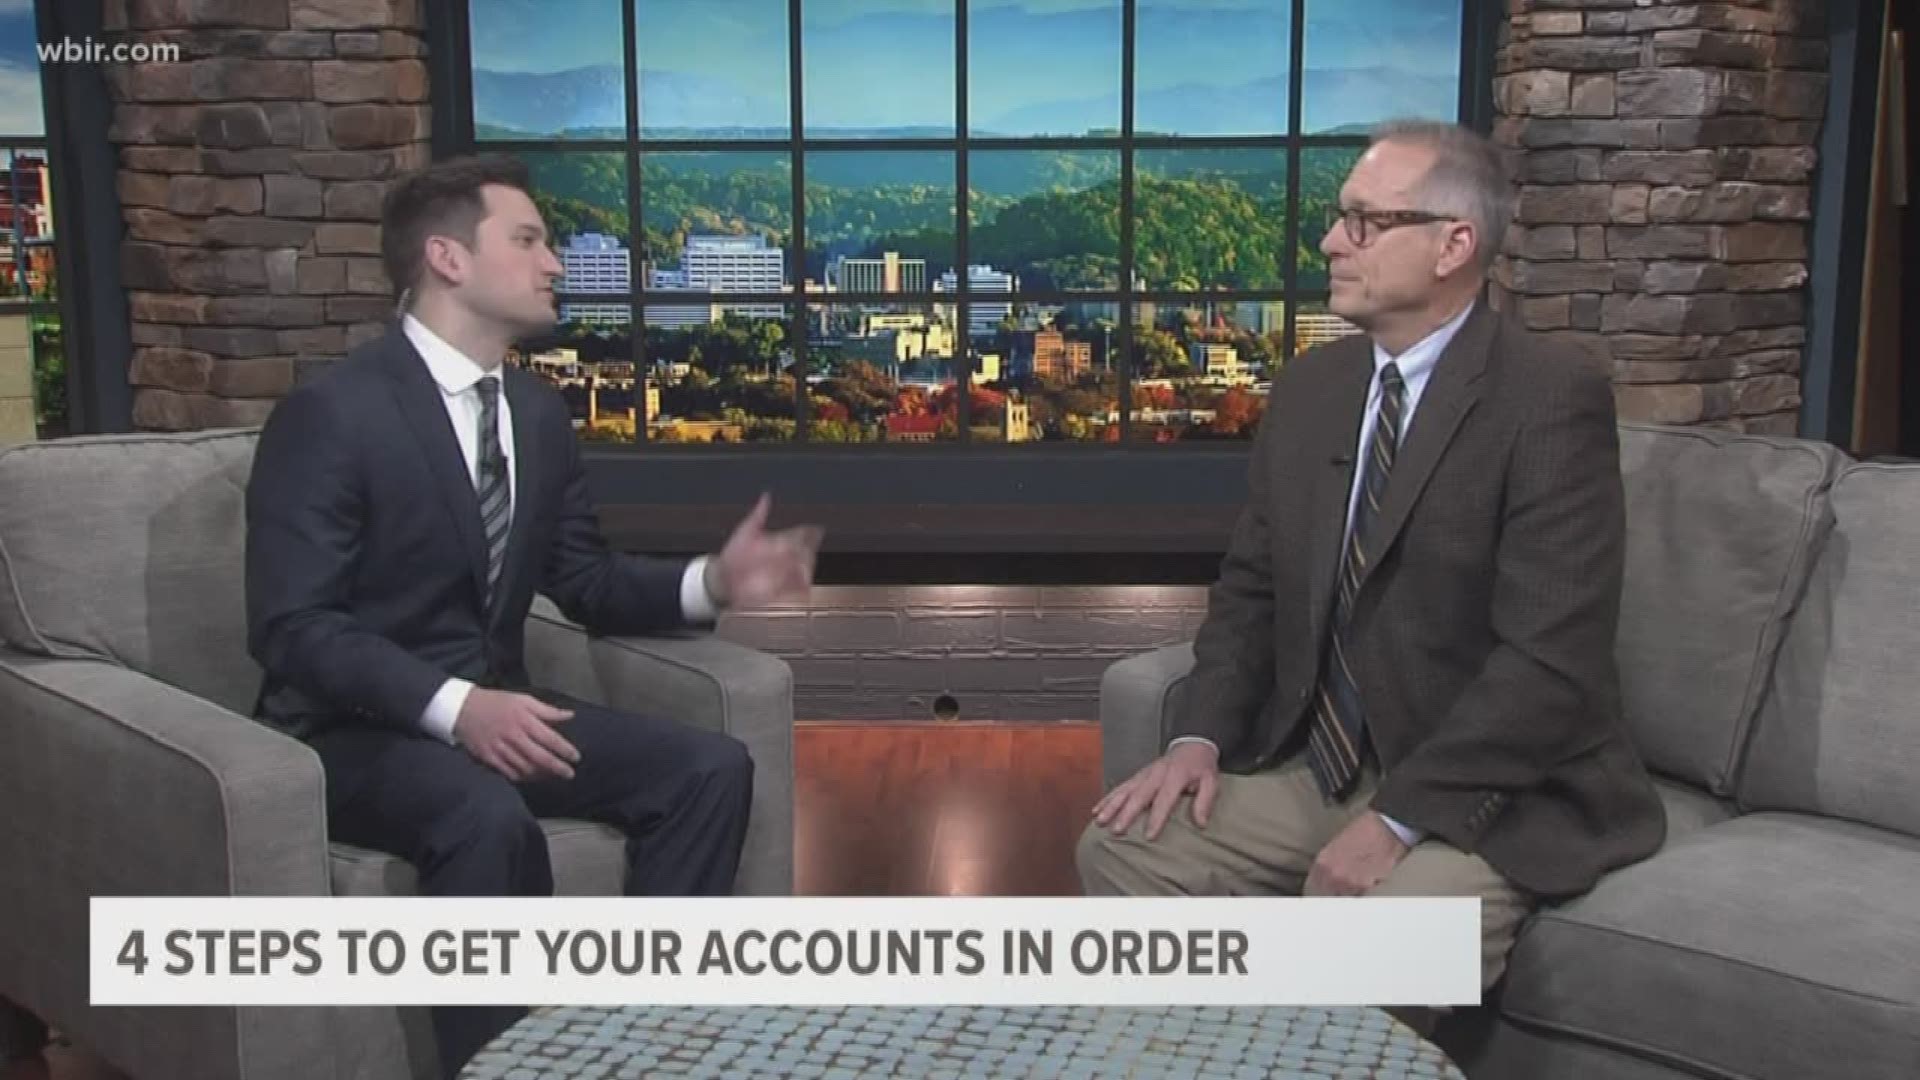 Certified financial planner, Paul Fain, shares his tips for managing bank accounts when a family member passes away